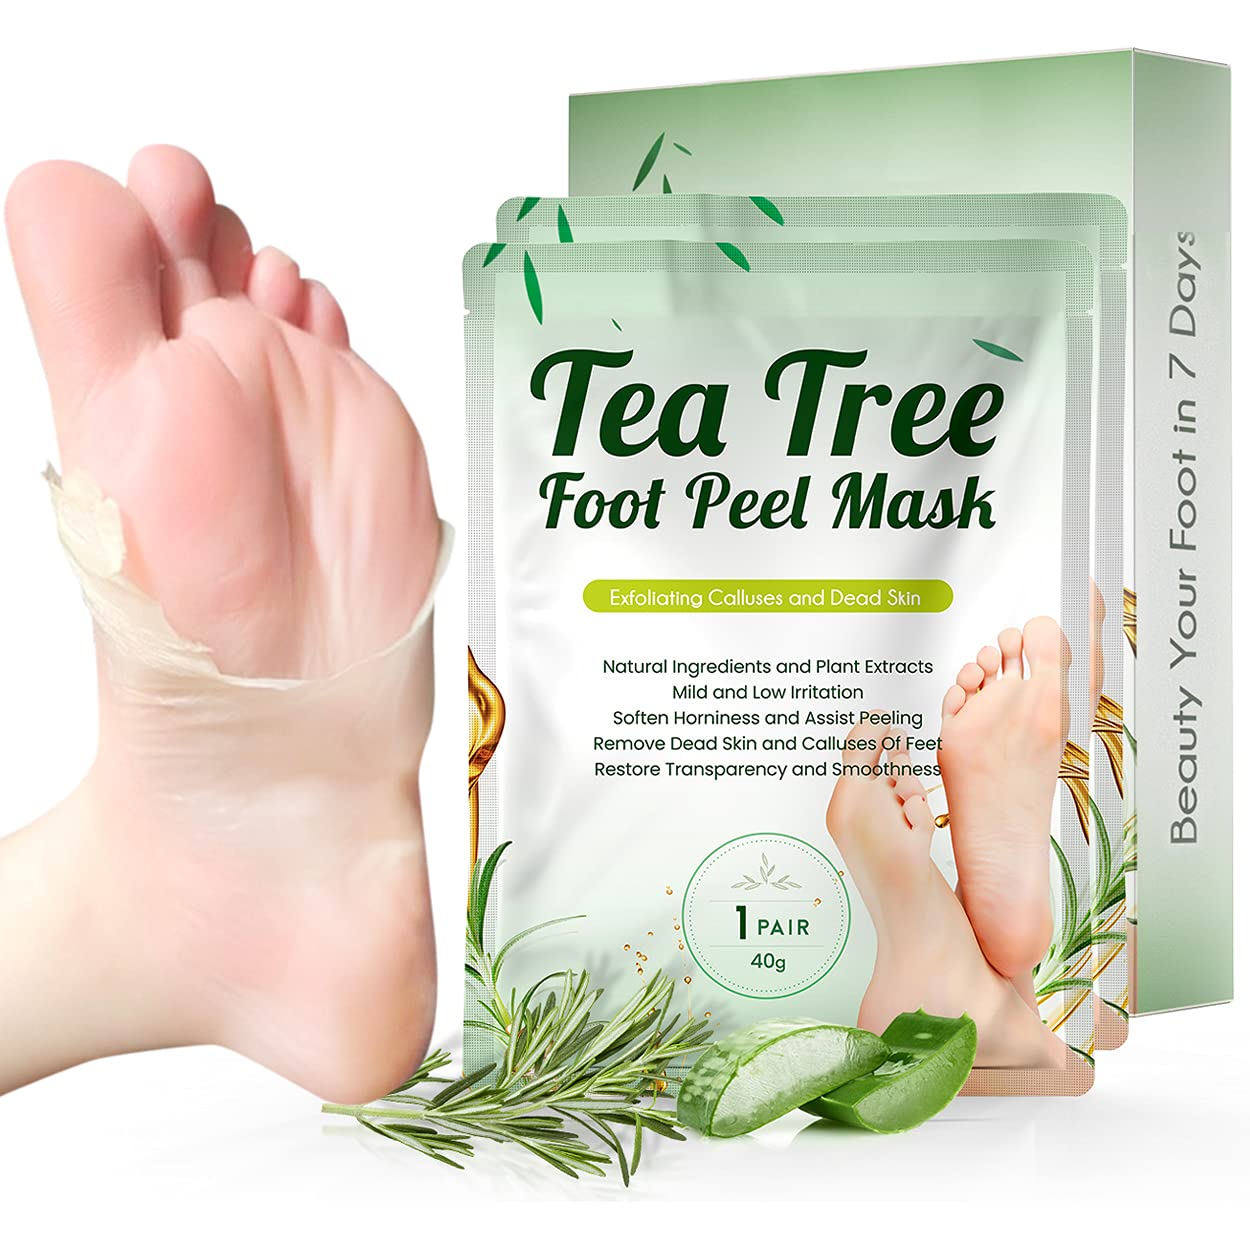 Tea Tree Foot Soak (1 lb) and Foot Peel Mask - Foot Care Kit For Dry  Cracked Feet and Heels - Remove Dead Skin and Calluses - Treats Athlete's  Foot